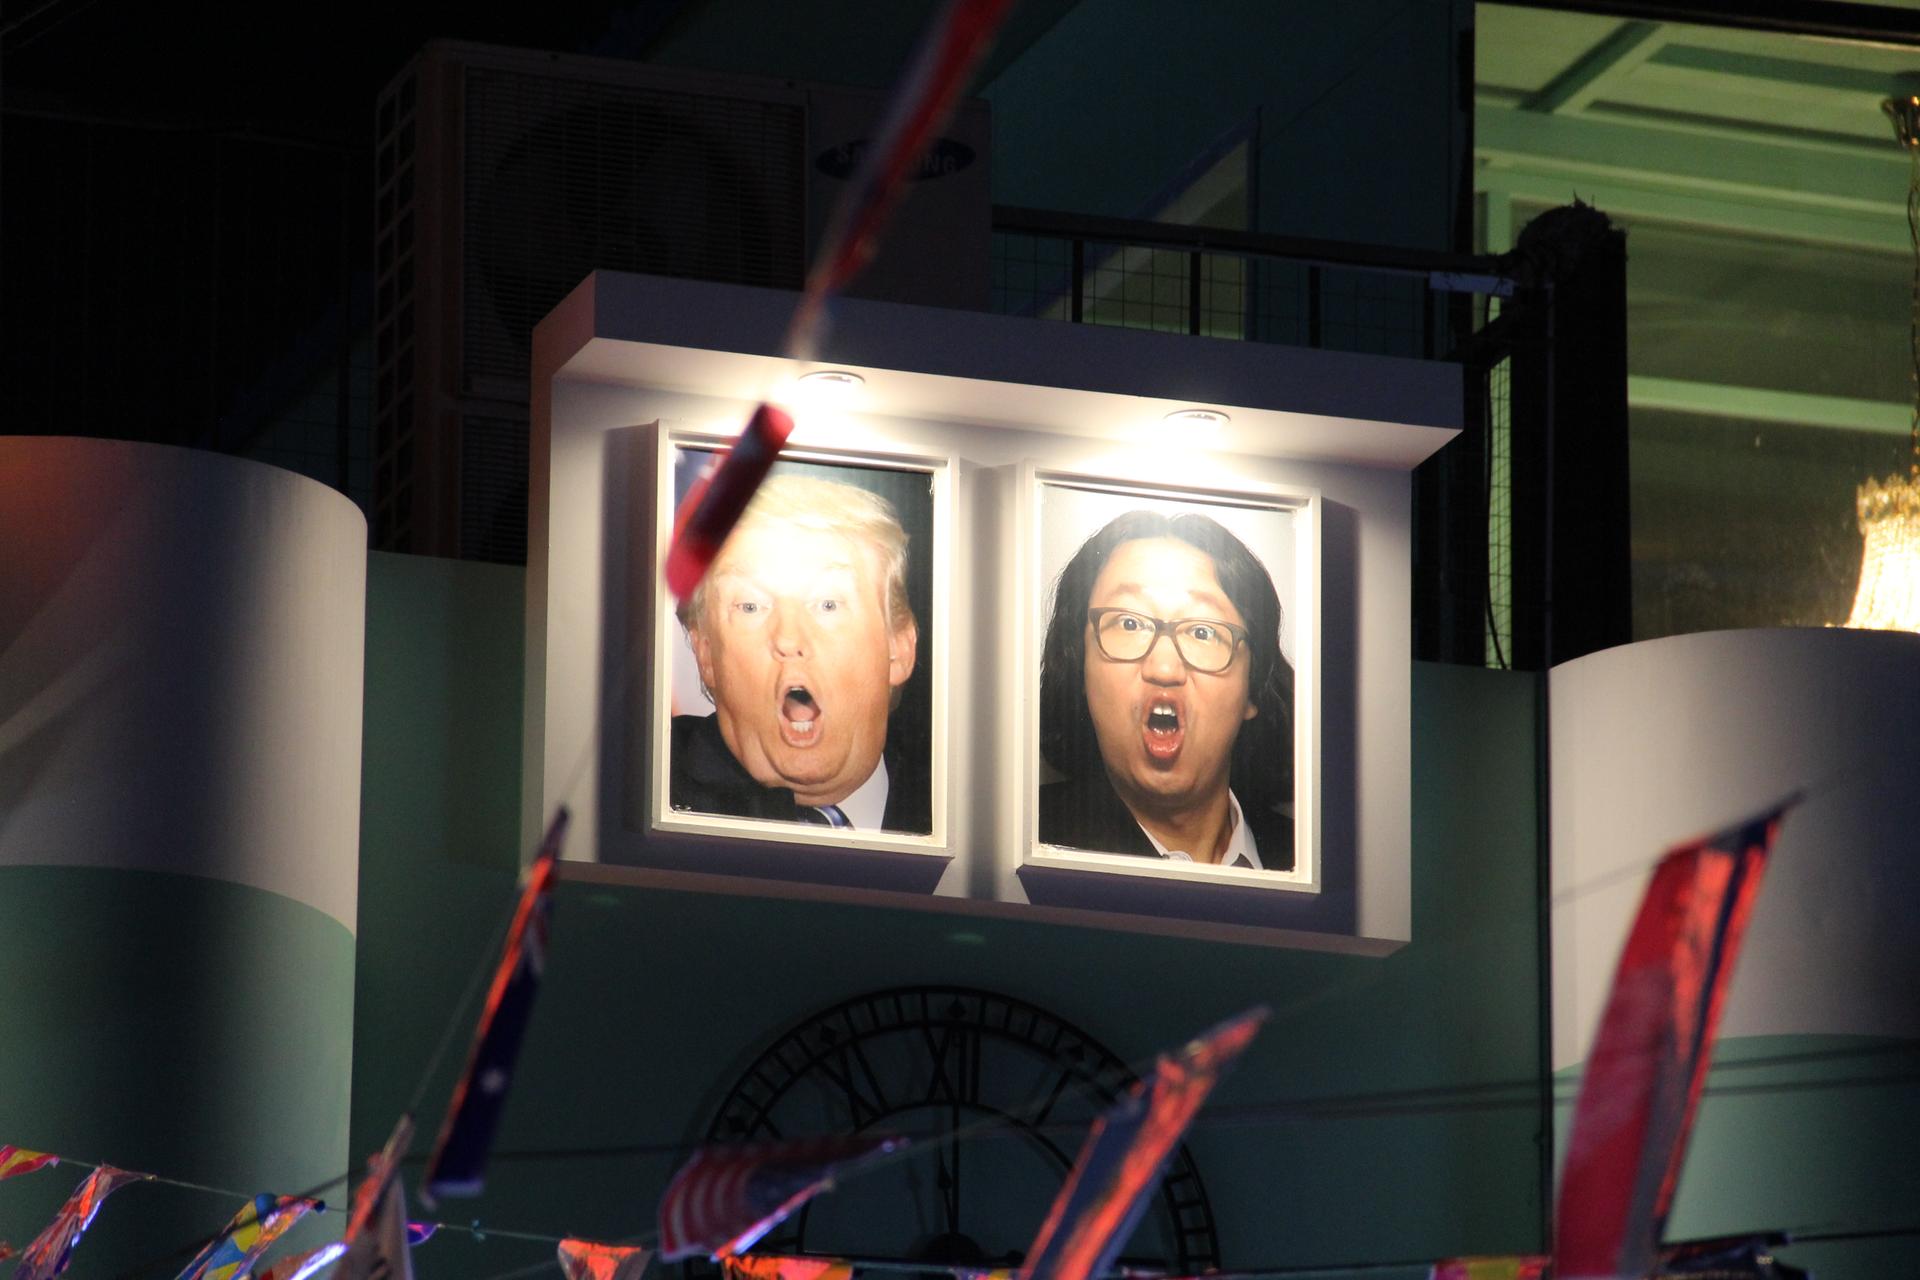 Caricaturelike portraits of United States President Donald Trump and South Korean comedian Kim Gyeong-jin are displayed outside the pub.